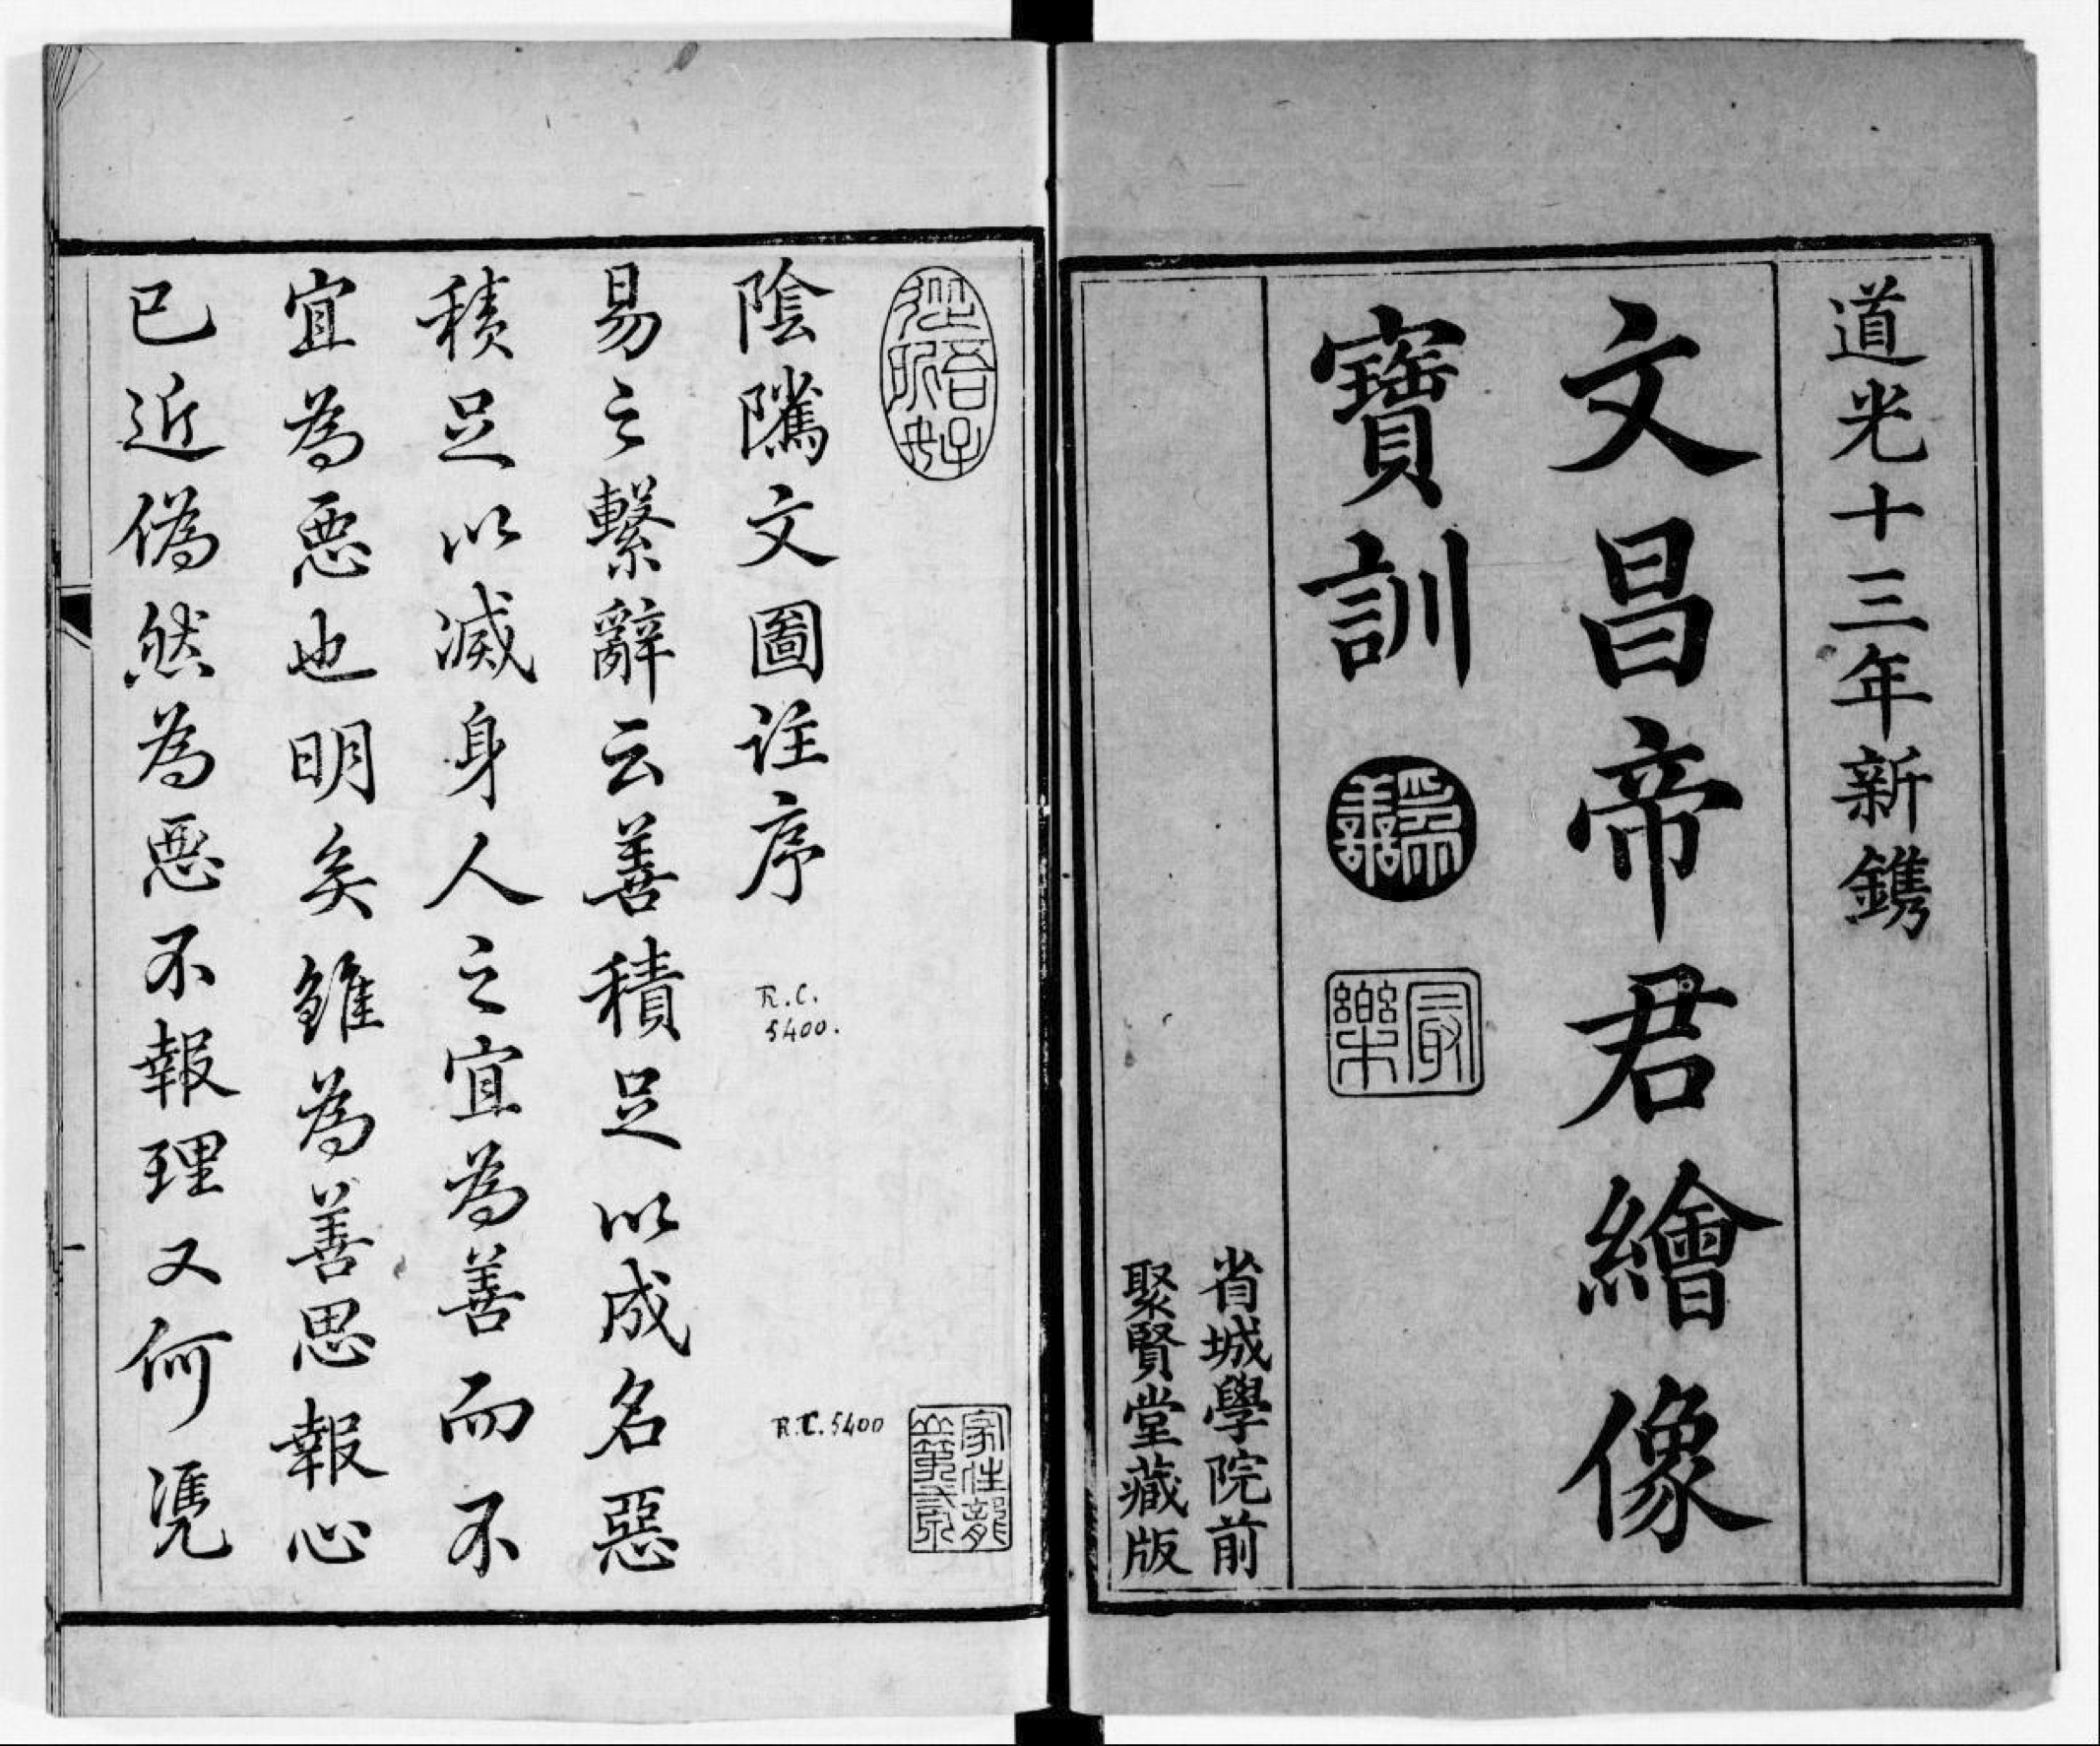 BnF Chinois 5584 title page.jpg